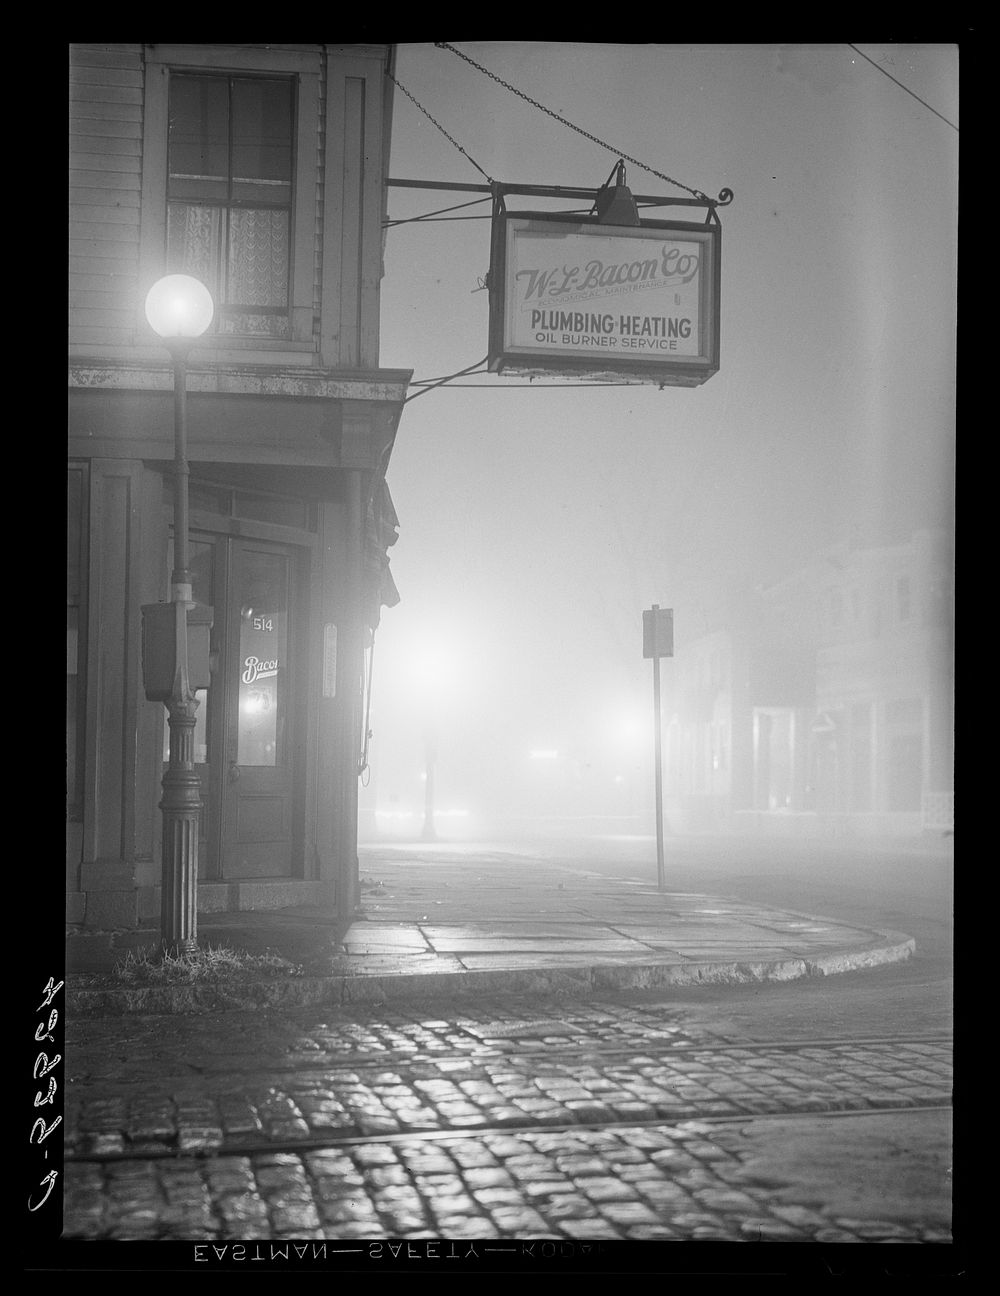 On a foggy night in New Bedford, Massachusetts. Sourced from the Library of Congress.